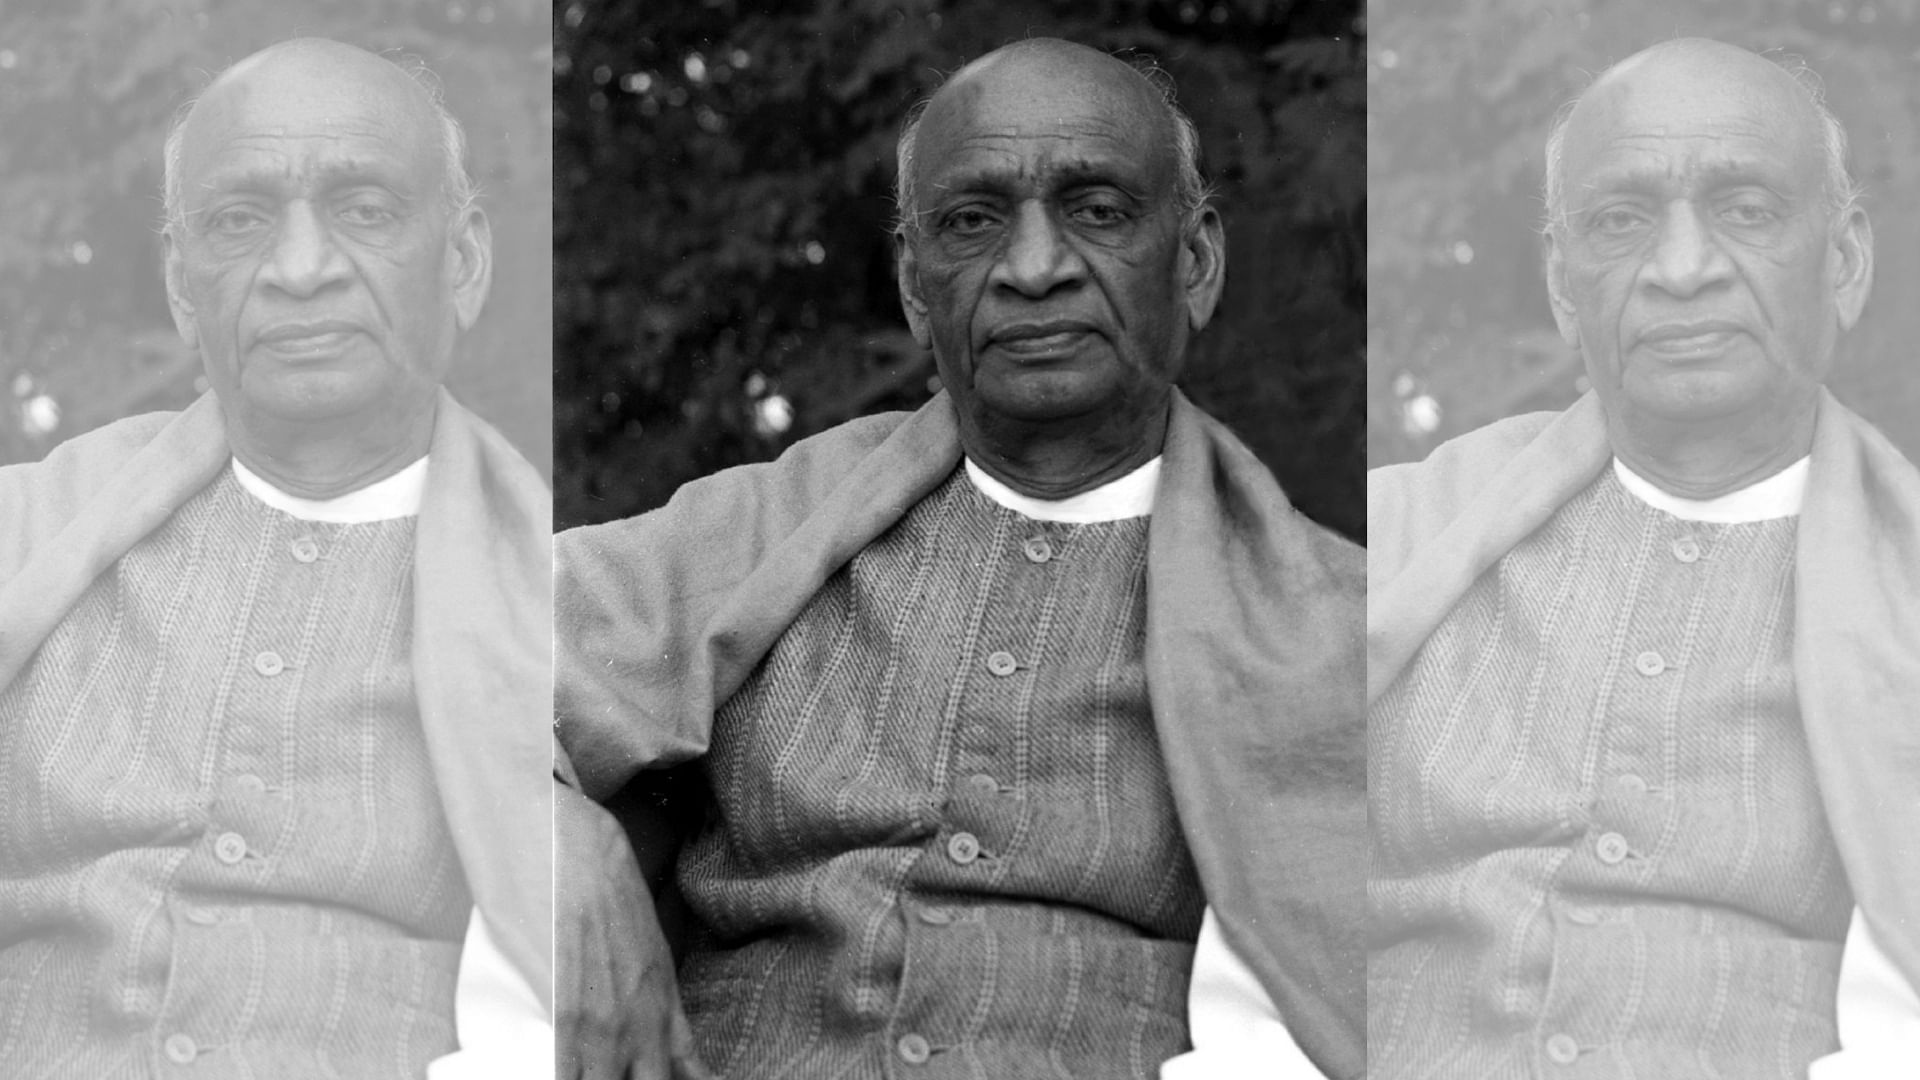 Hindol Sengupta’s book The Man Who Saved India, a biography of Sardar Vallabhbhai Patel, is being made into a web series.